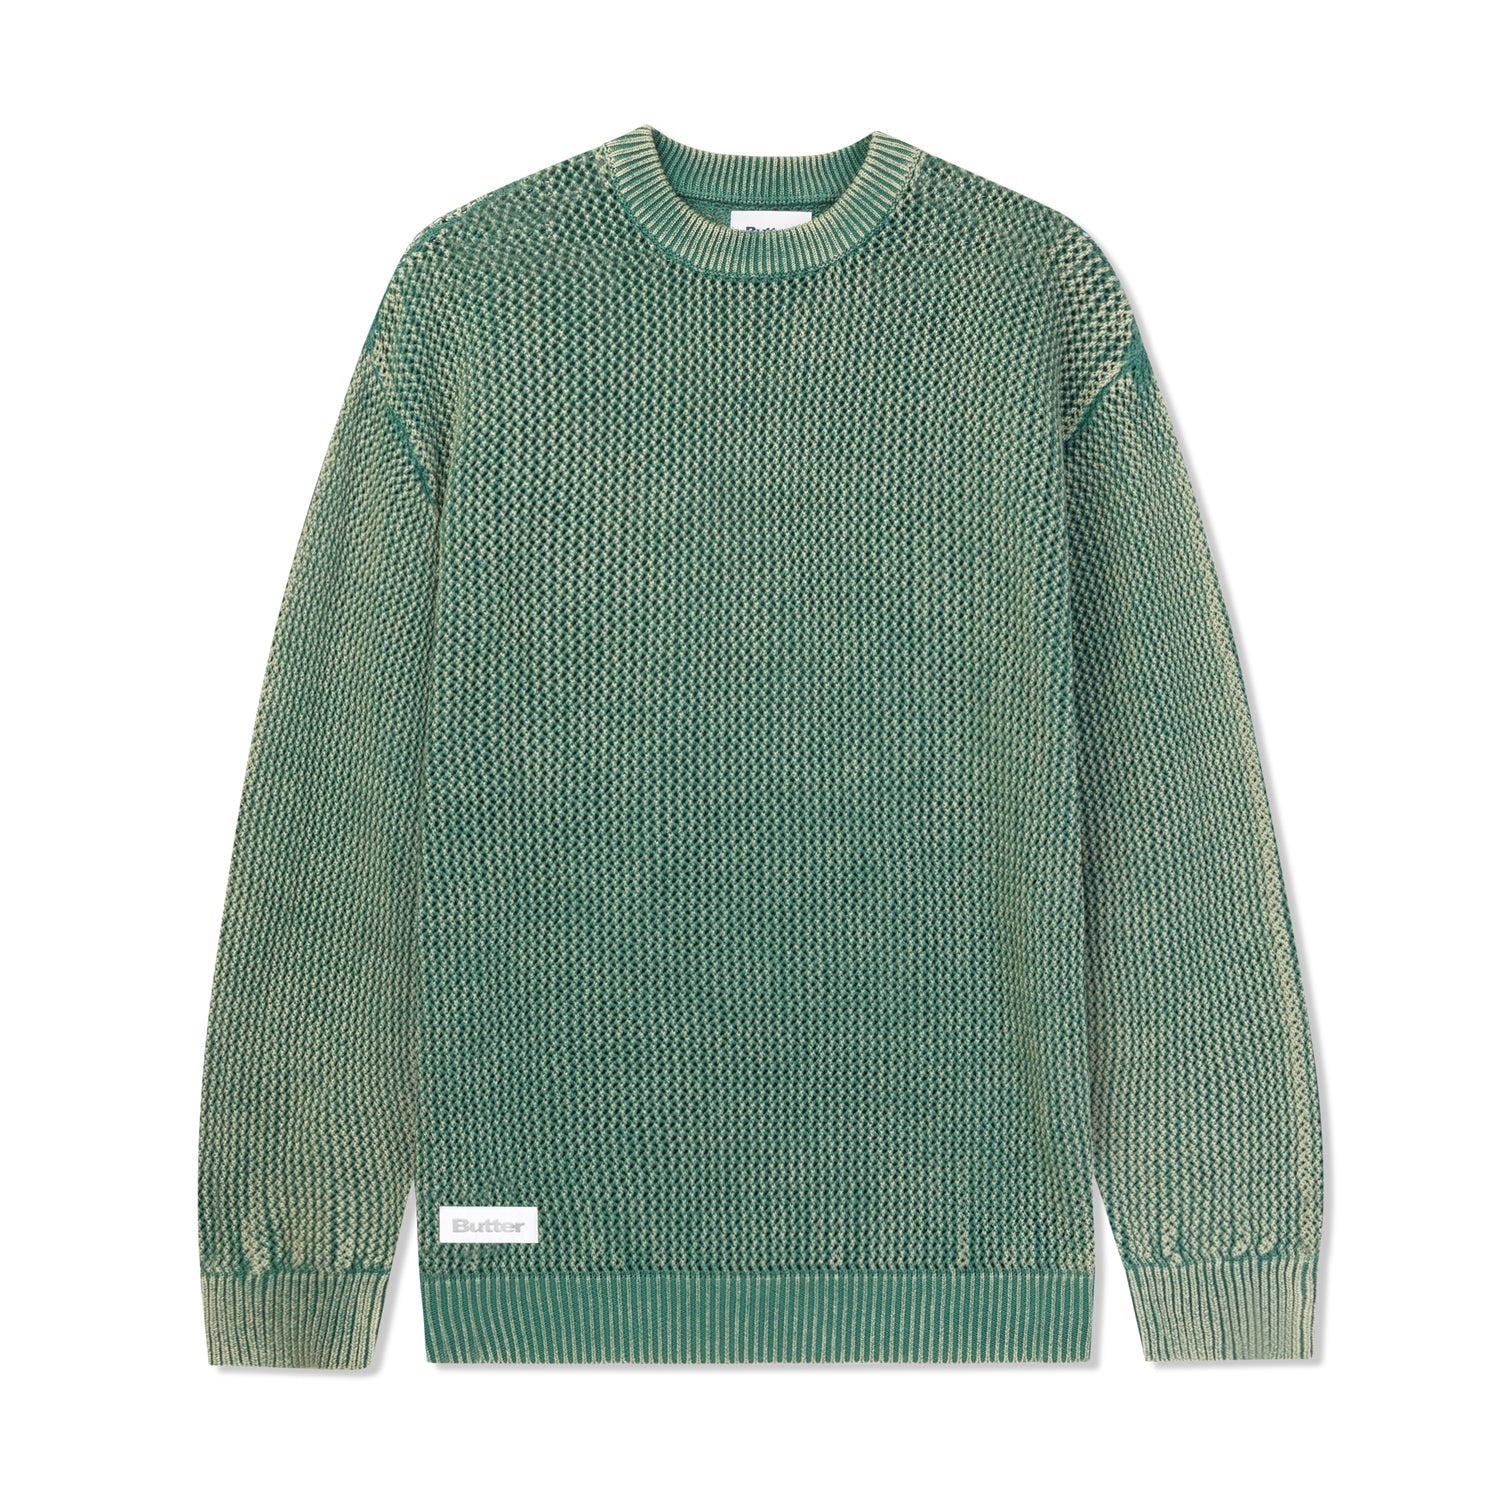 Washed Knitted Sweater, Washed Army